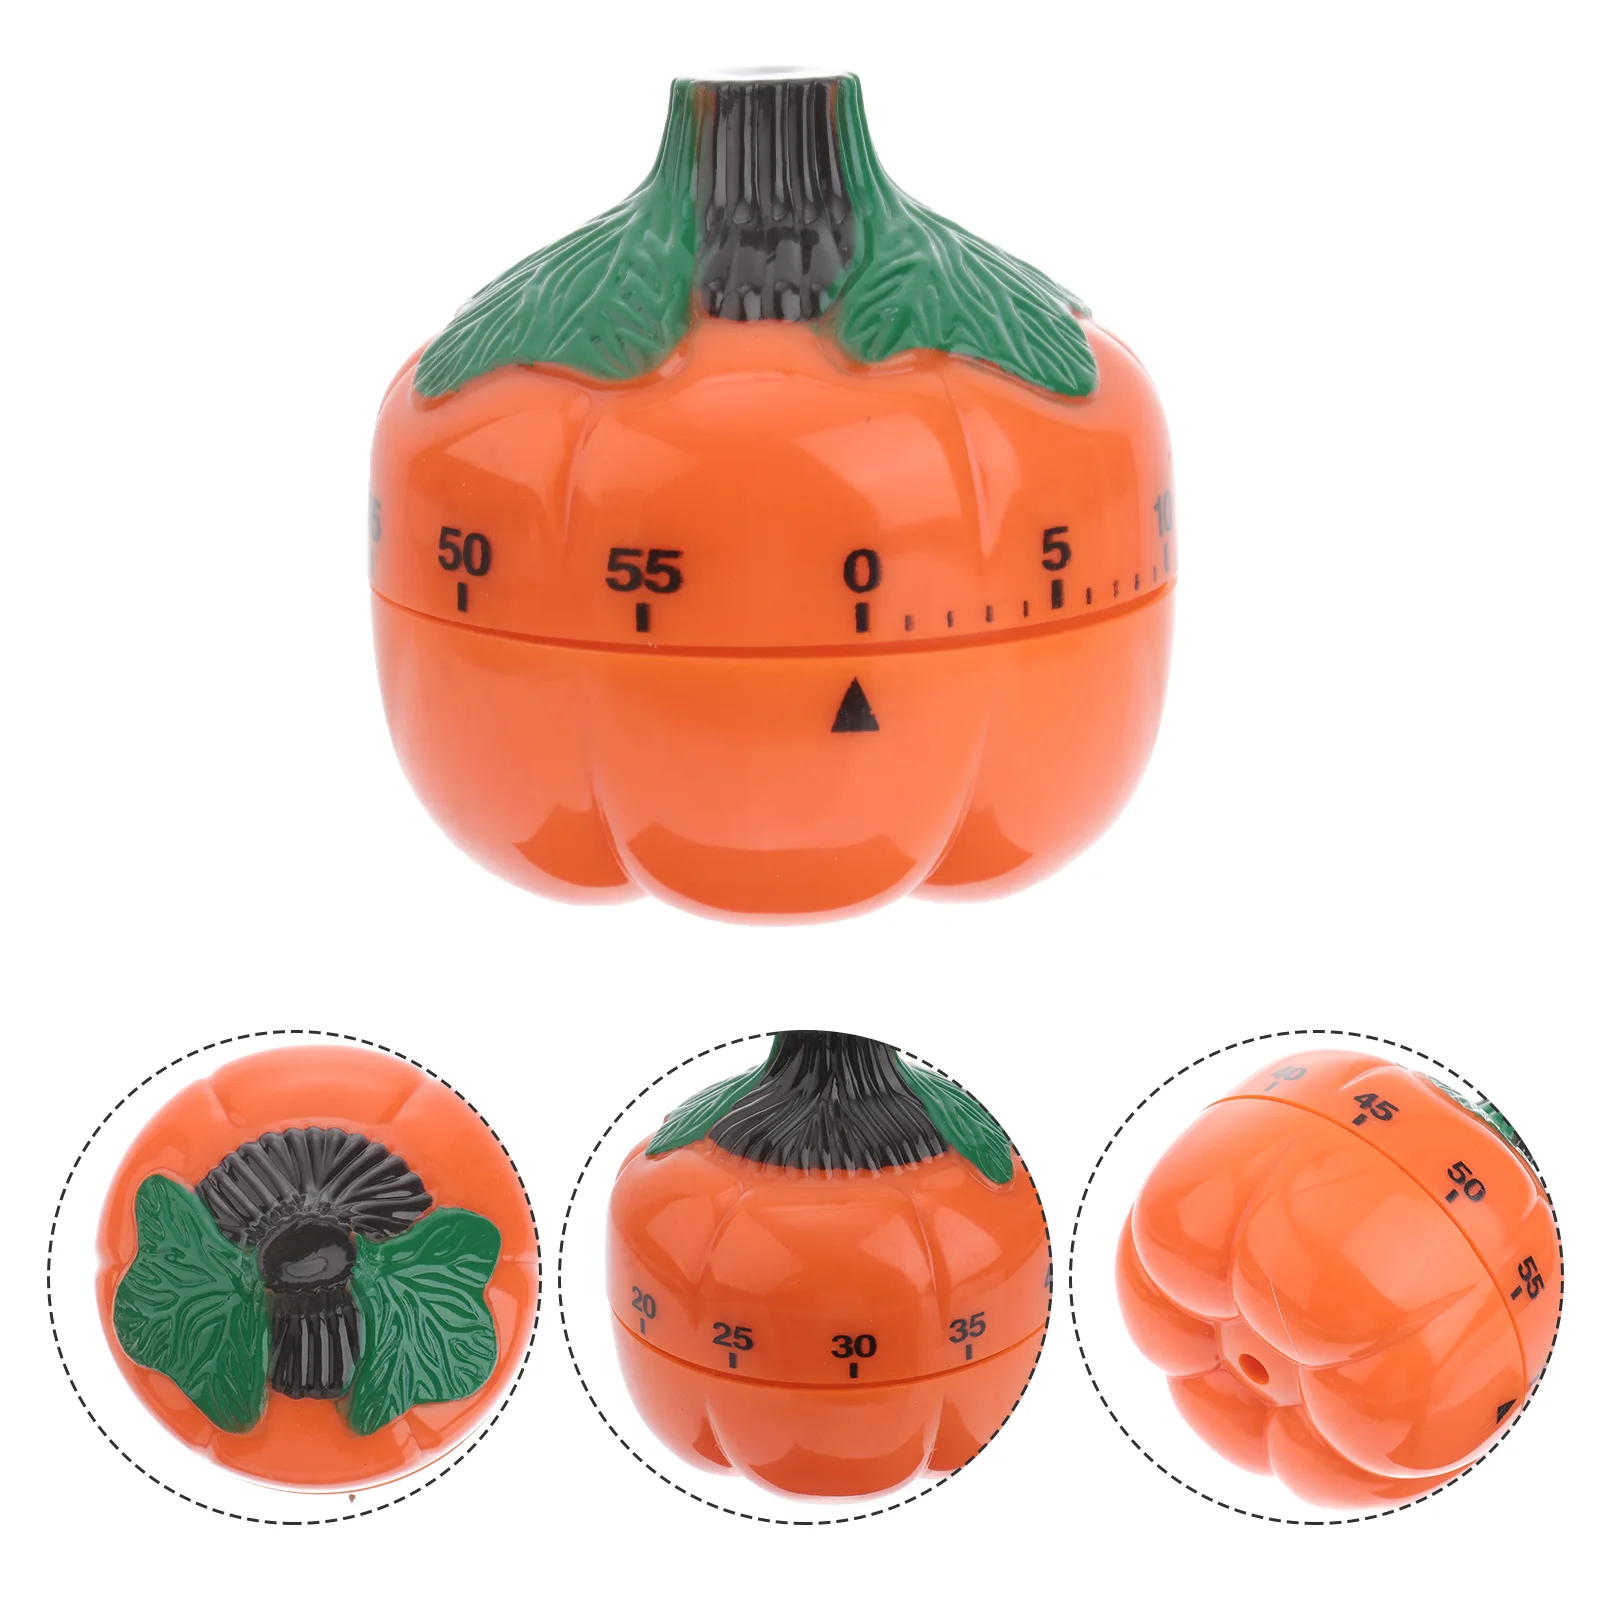 

Mechanical Timer Pumkin Shaped Kitchen Timer Multi- Function Timer Kitchen Mechanical Clock Cooking Time Manager for Tomato